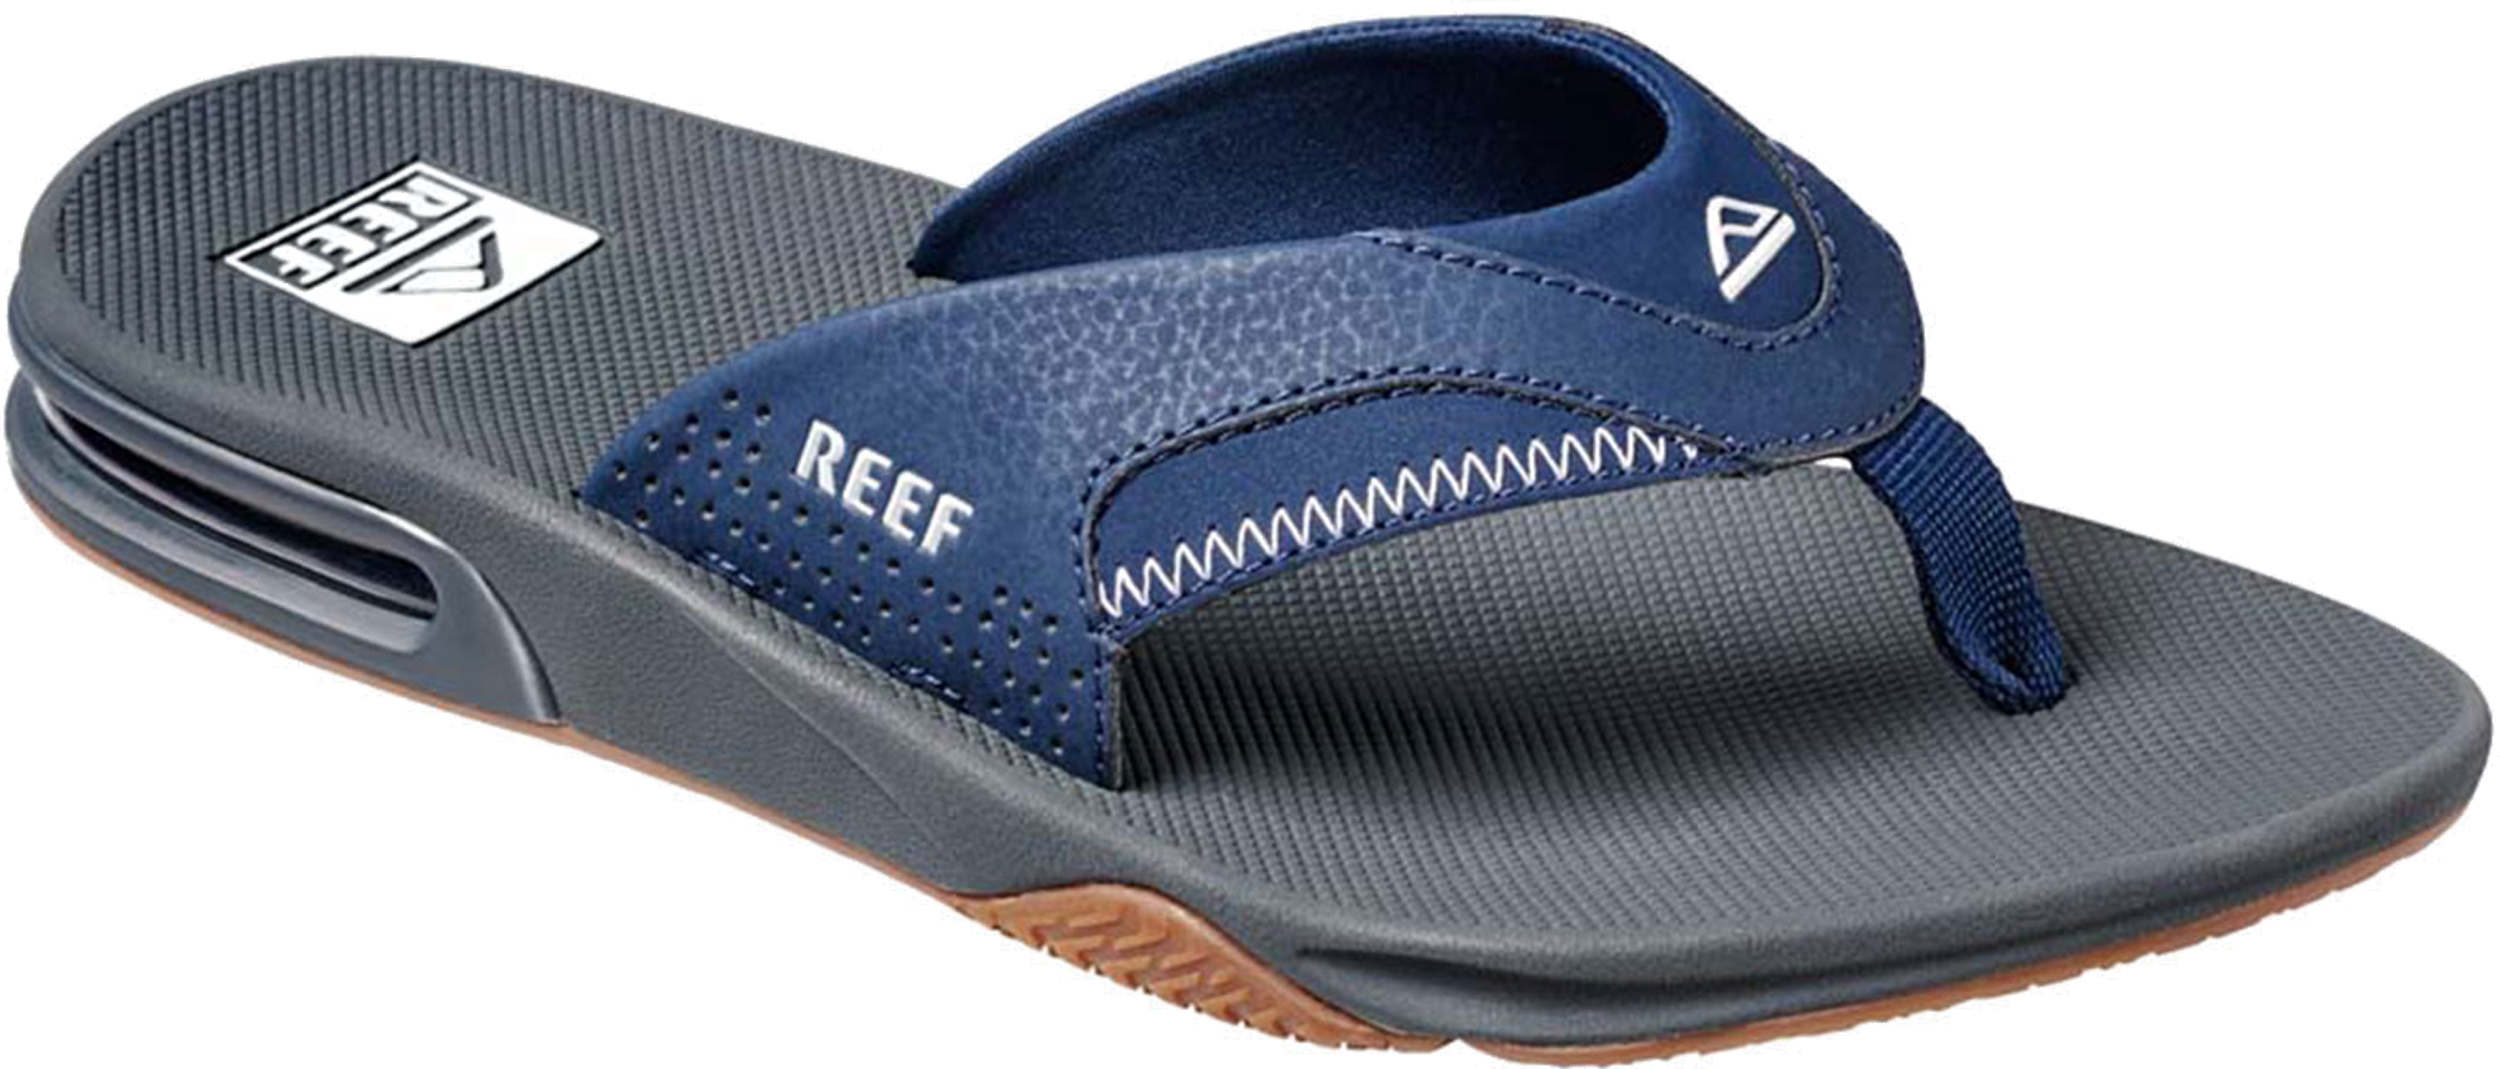 Reef Navy/Shadow Fanning size 7